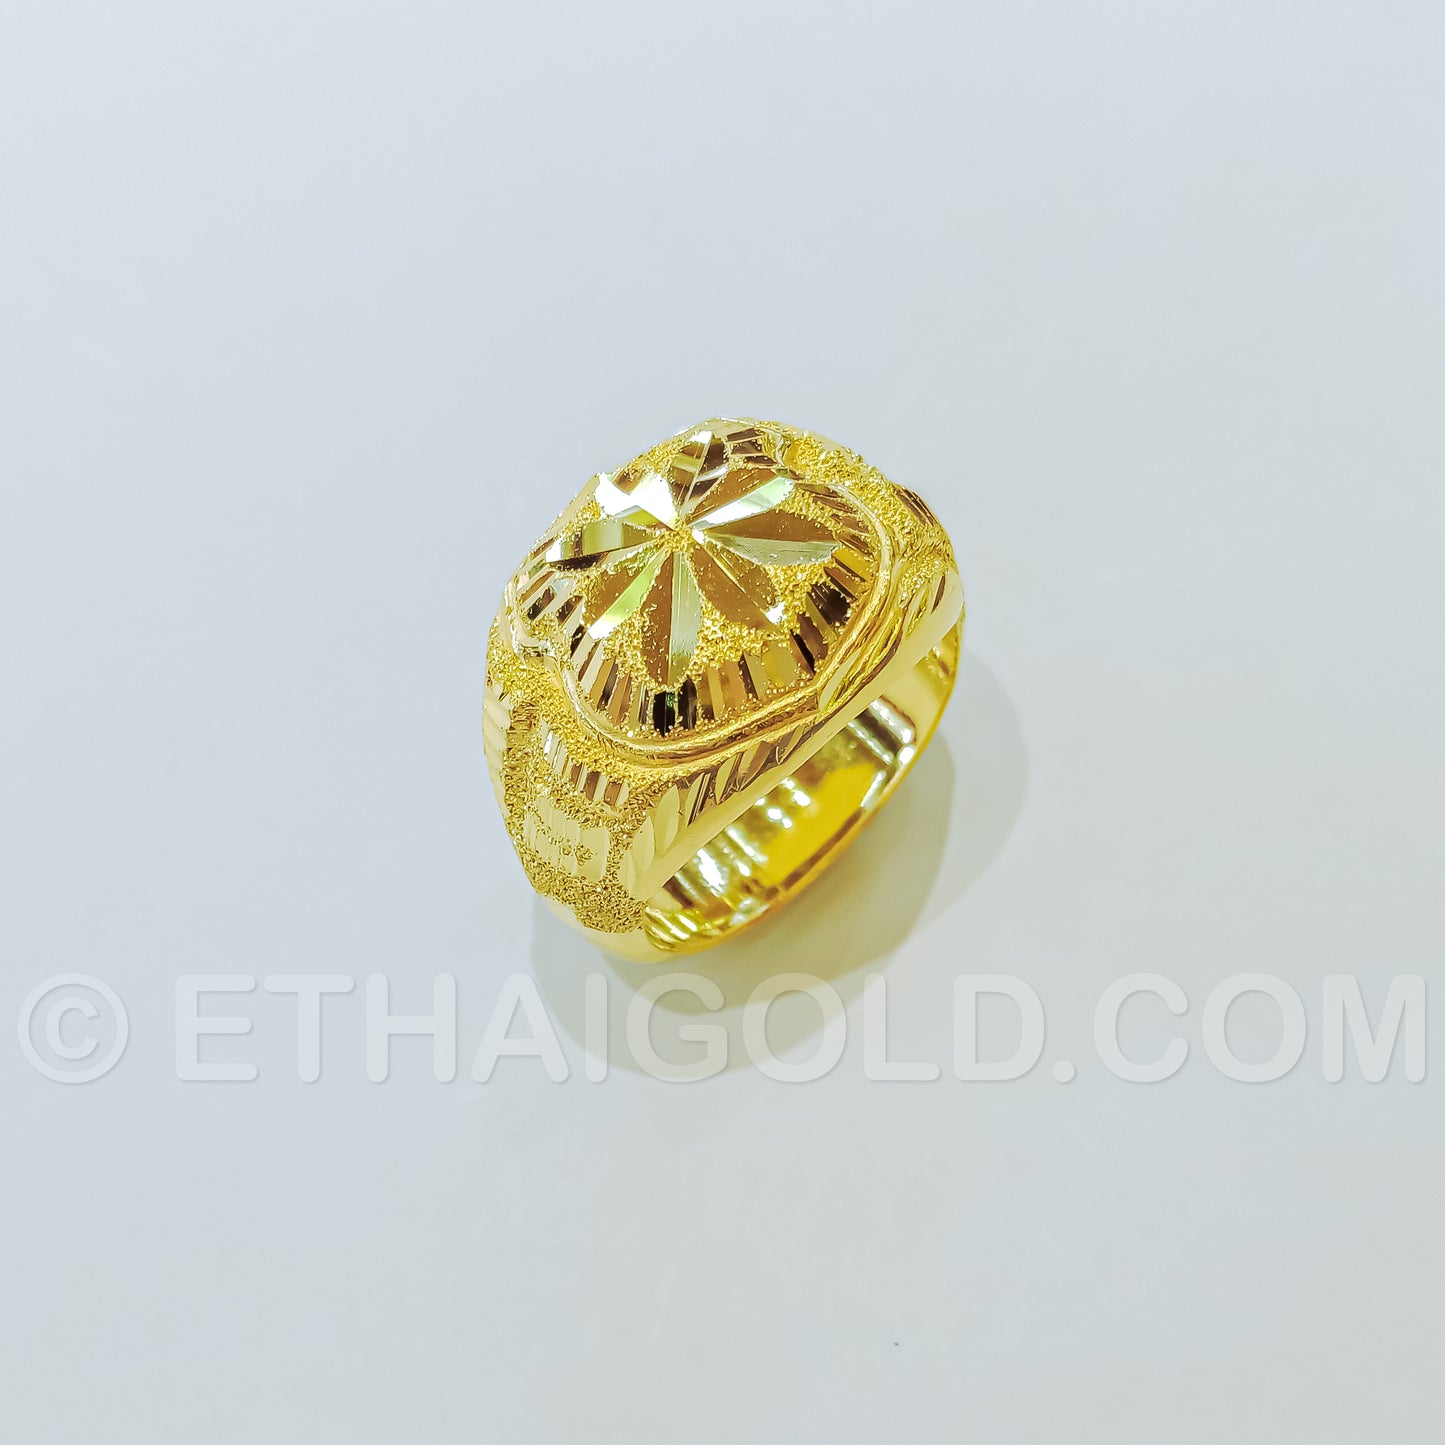 1 BAHT POLISHED SPARKLING DIAMOND-CUT HOLLOW SHIELD CLASSIC RING IN 23K GOLD (ID: R1101B)